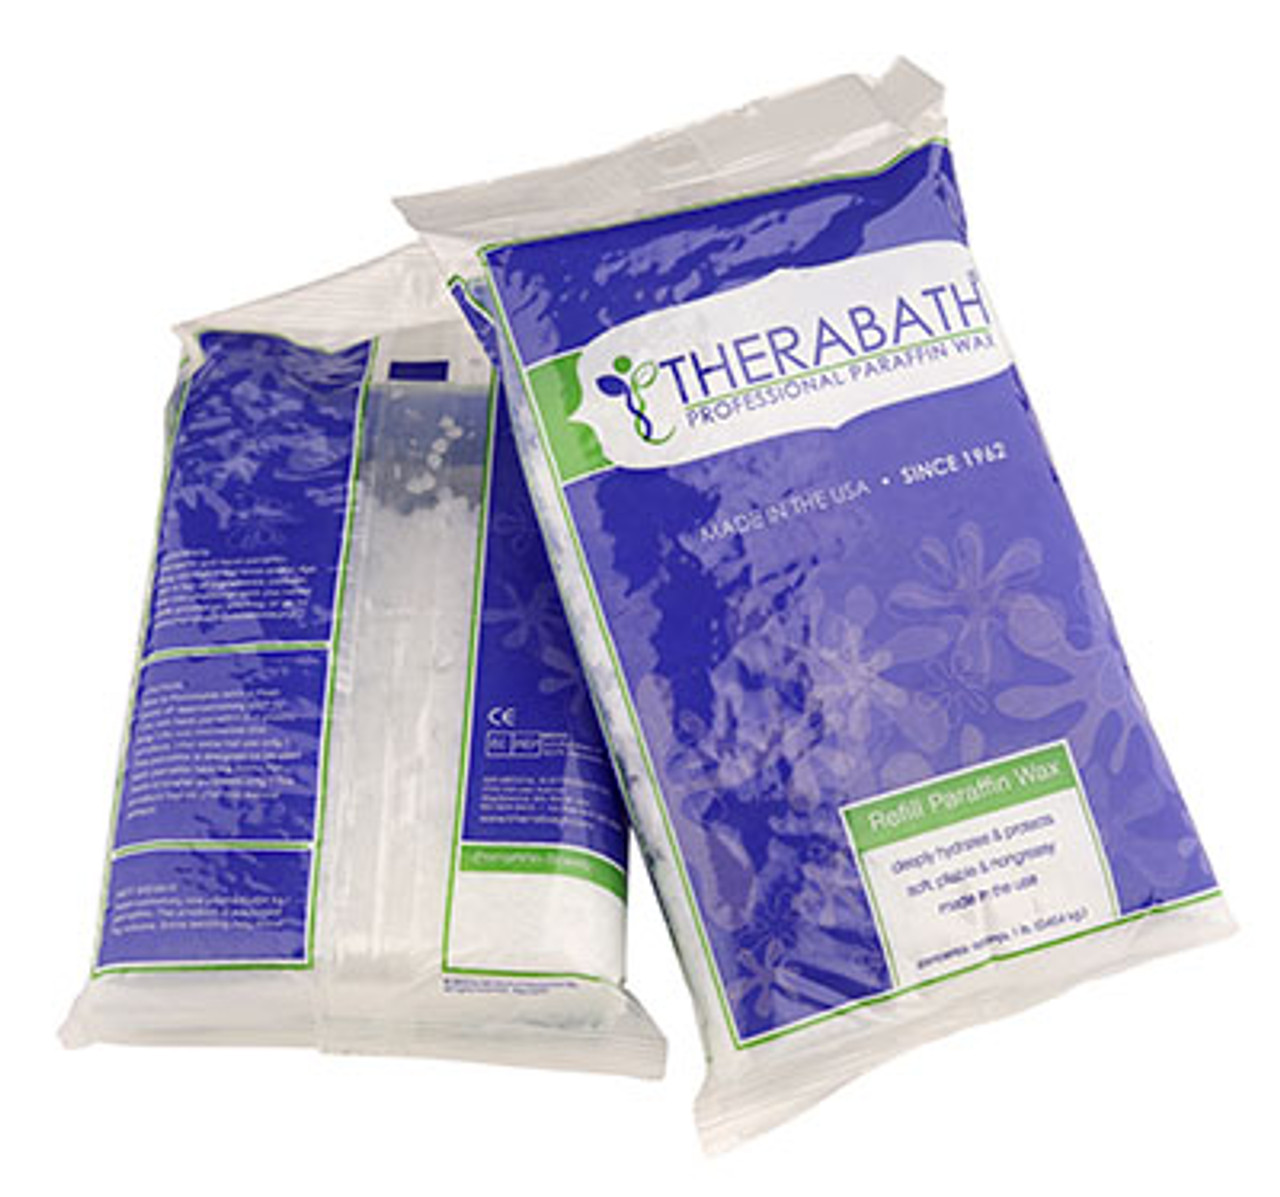 Therabath Refill Paraffin Wax, 6 x 1 lb bags of beads Wax Lavender